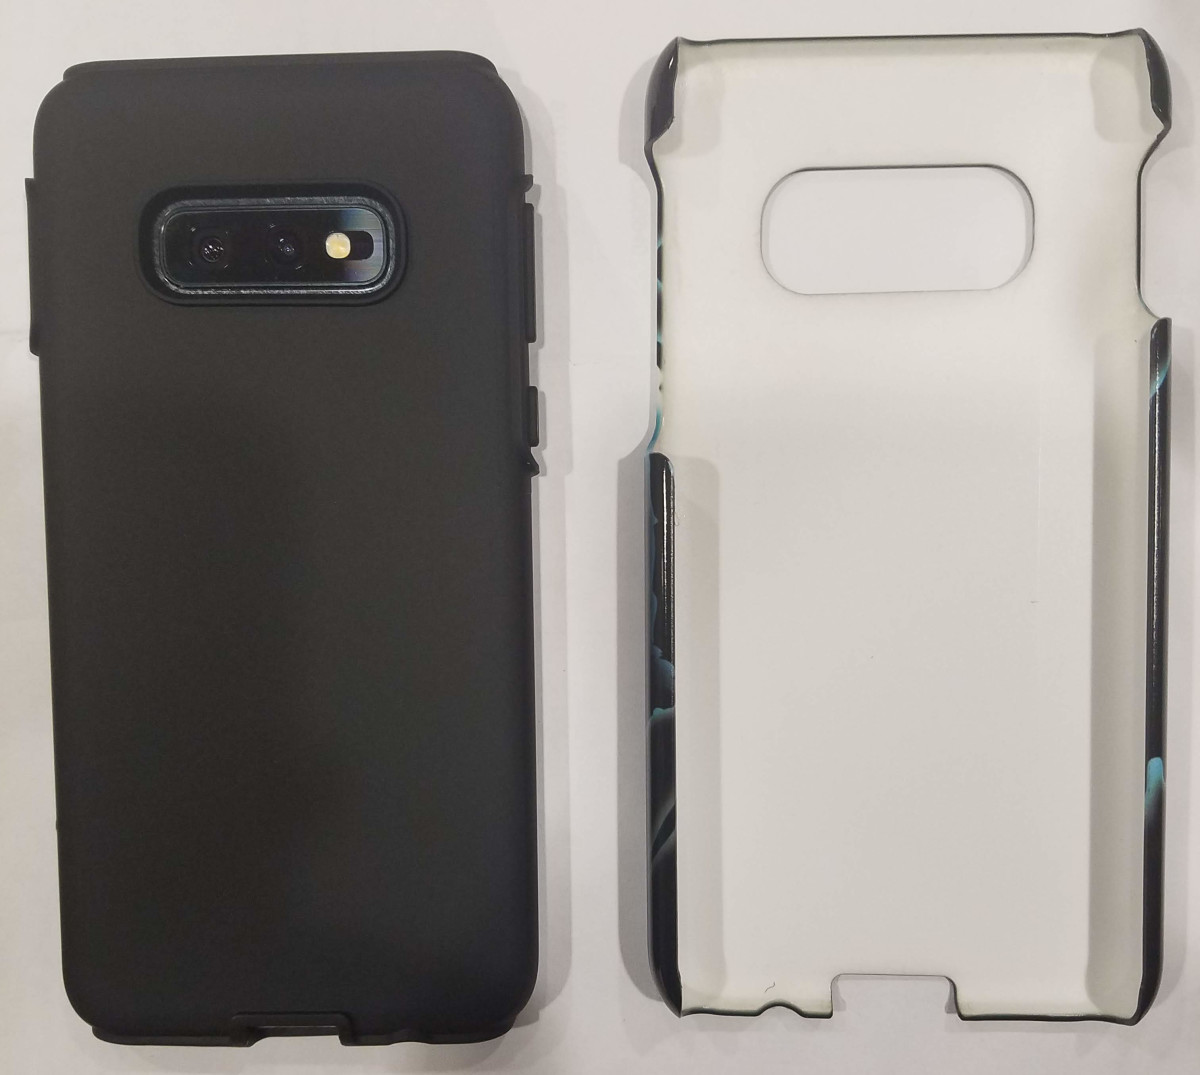 Review of the Redbubble Tough Phone Case: Pros and Cons